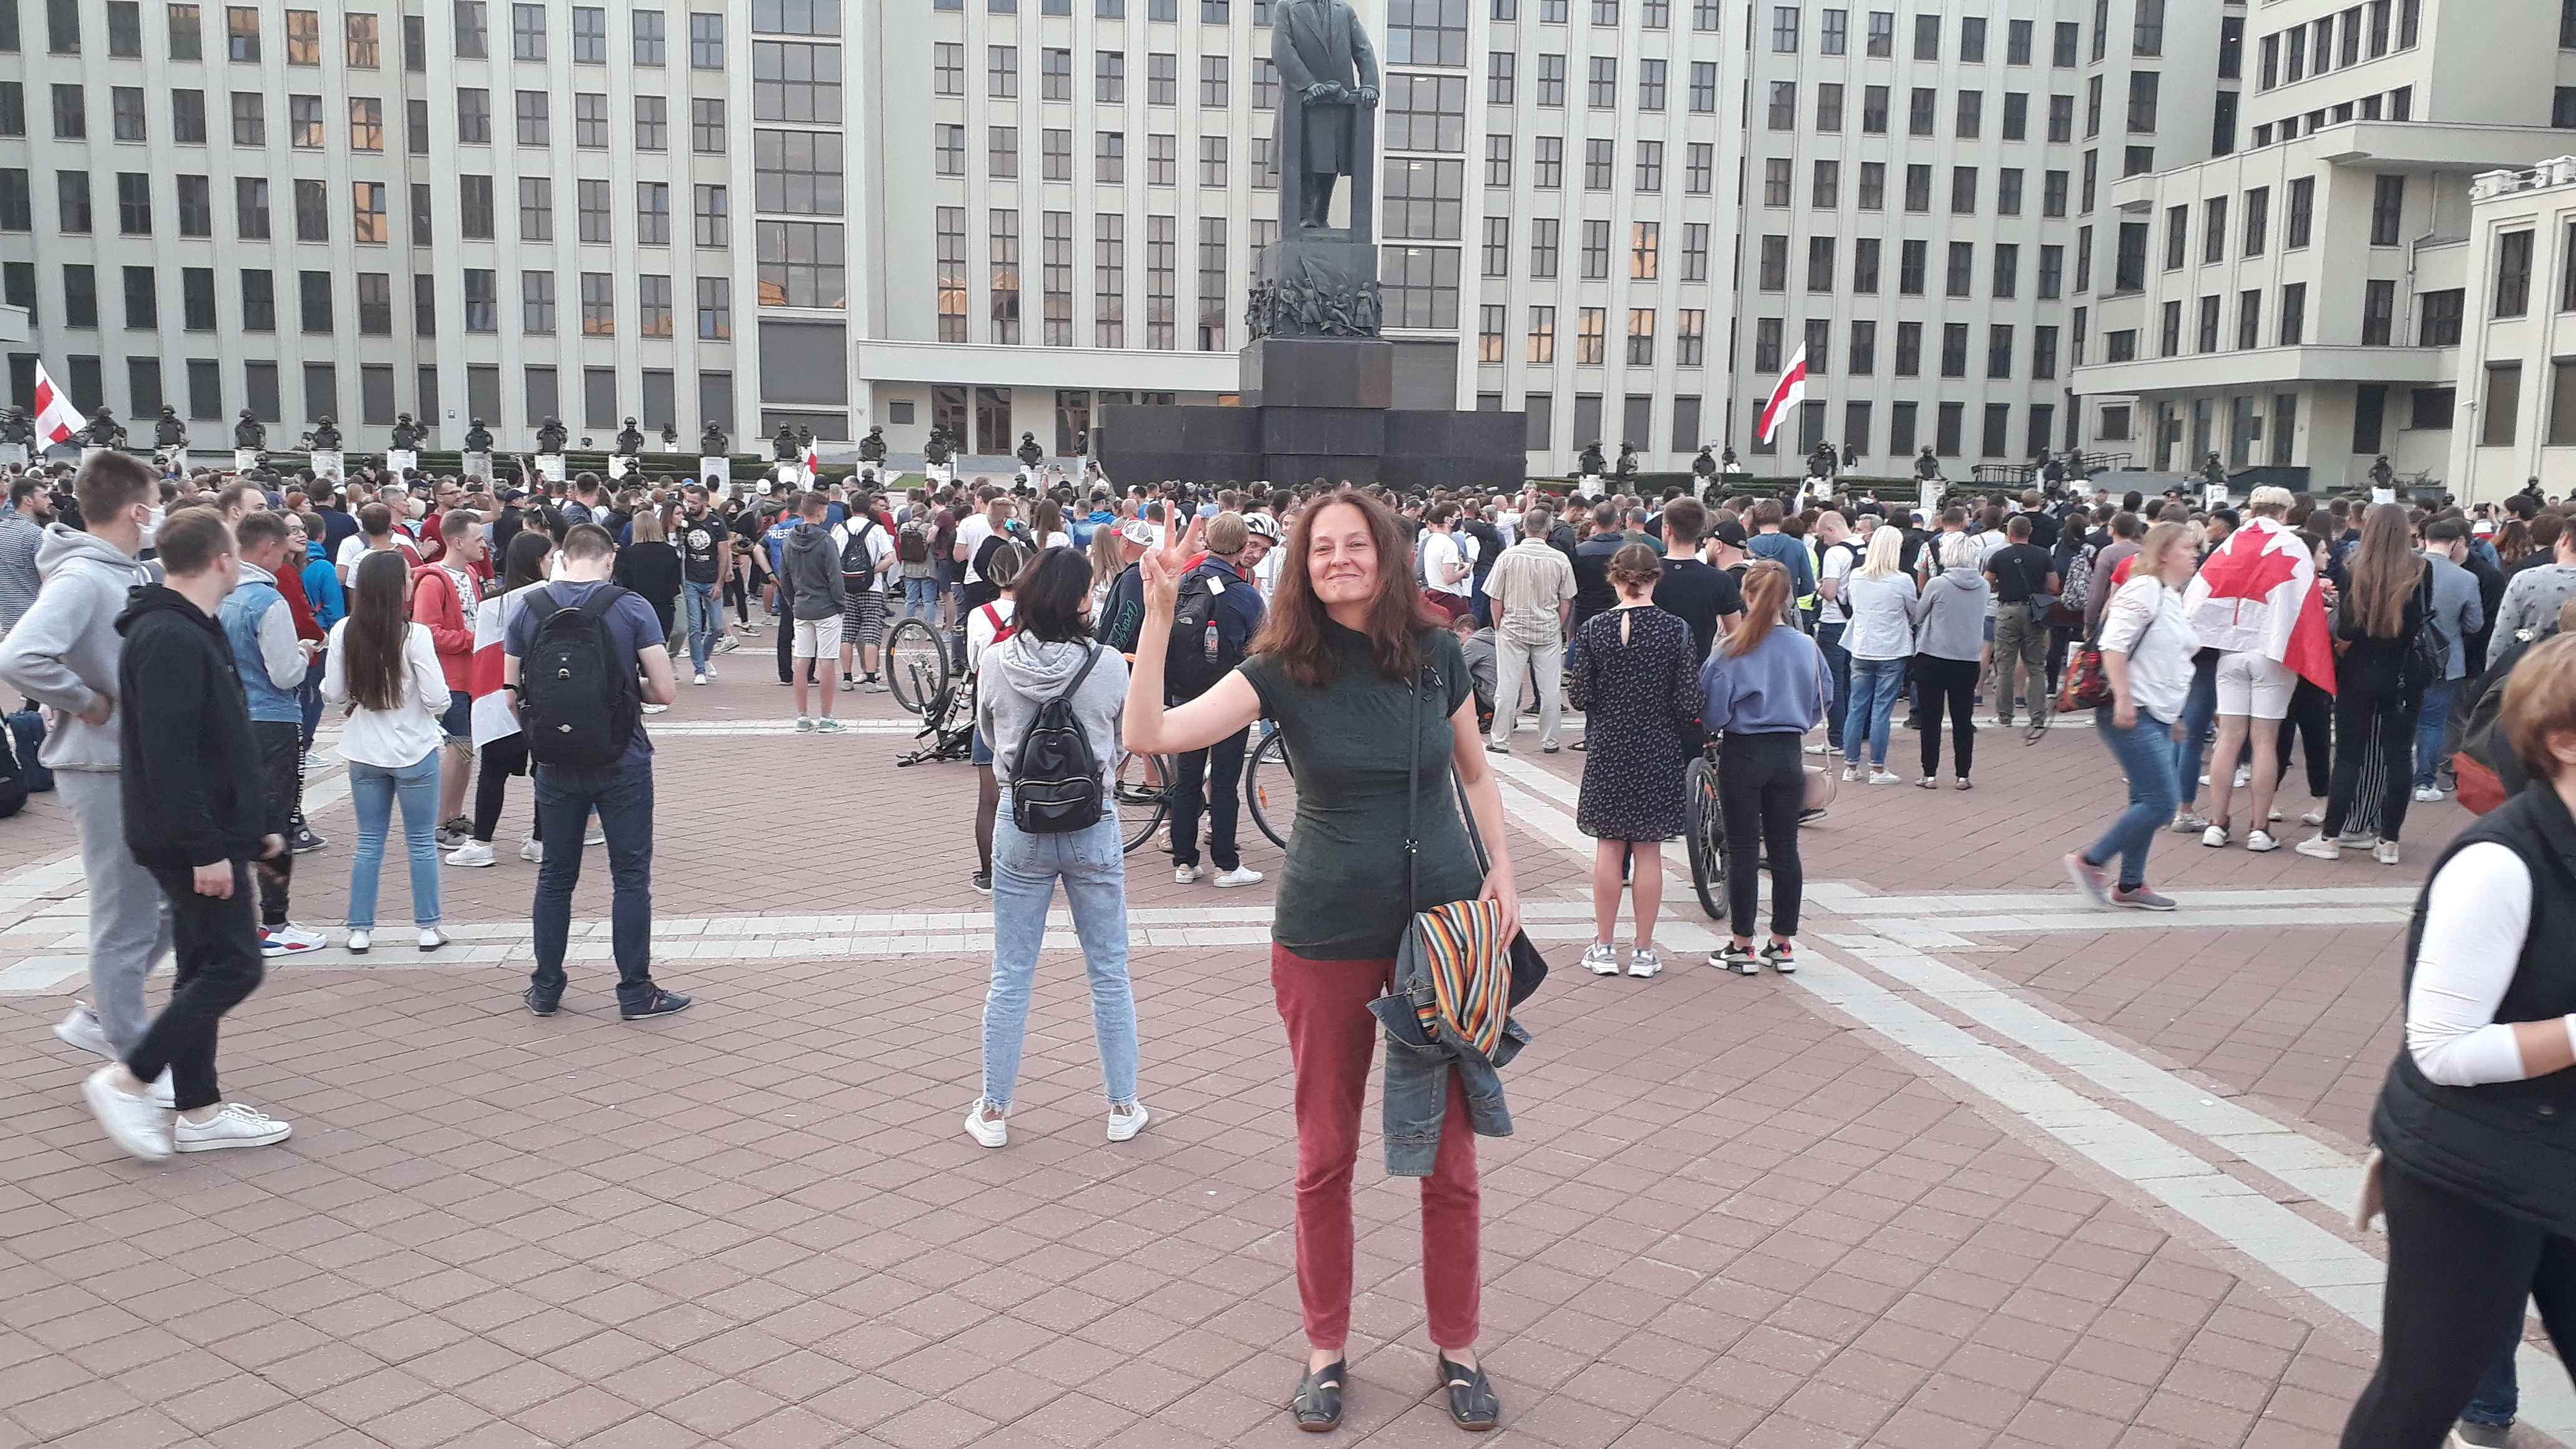 14 August 2020 in Minsk, standing in the square the author holds up a peace sign.